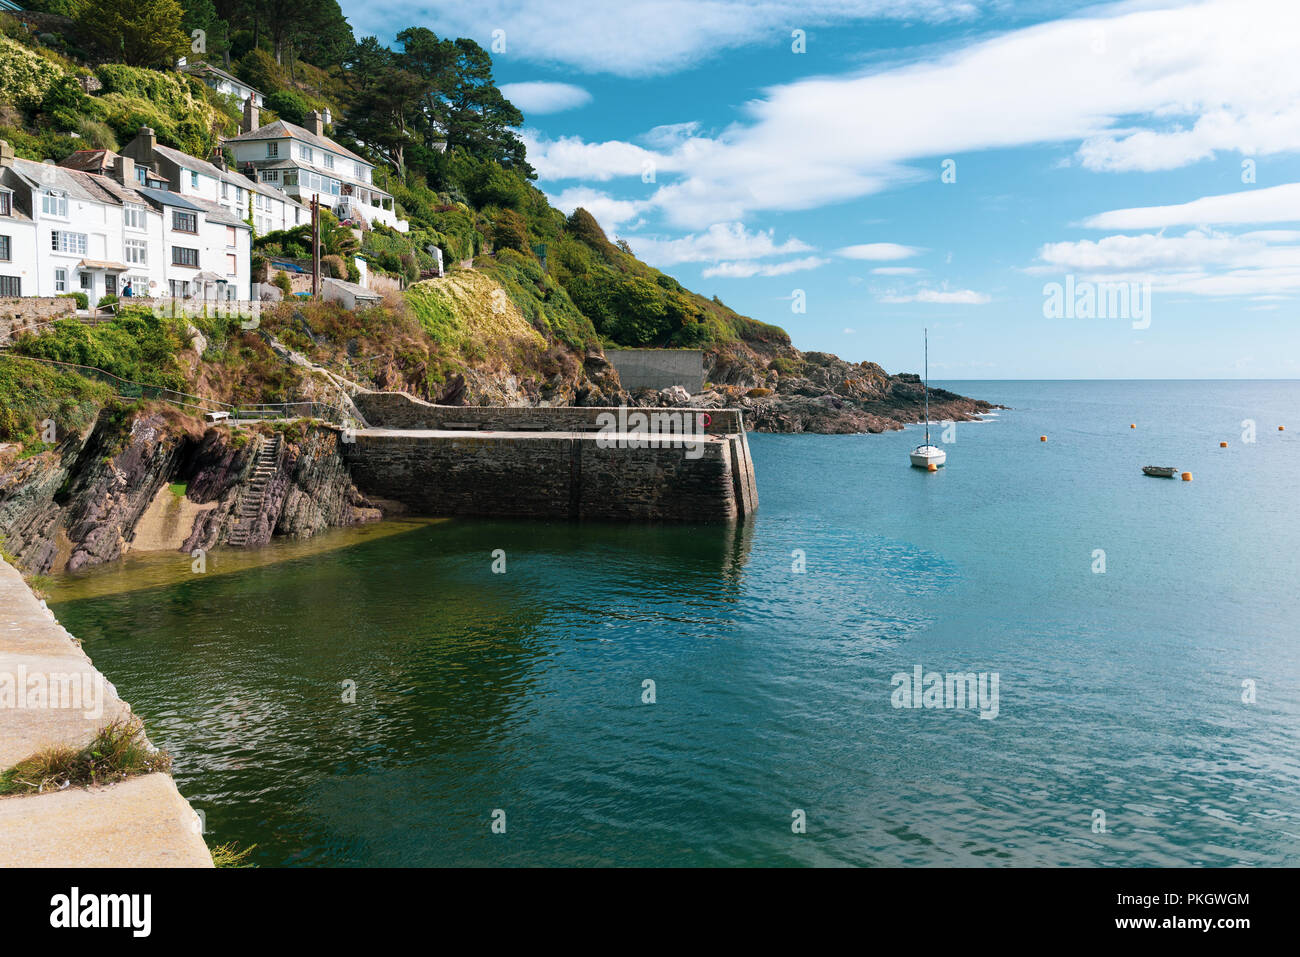 Turquoise sea and blue sky at Polperro, South Cornwall, England, UK Stock Photo